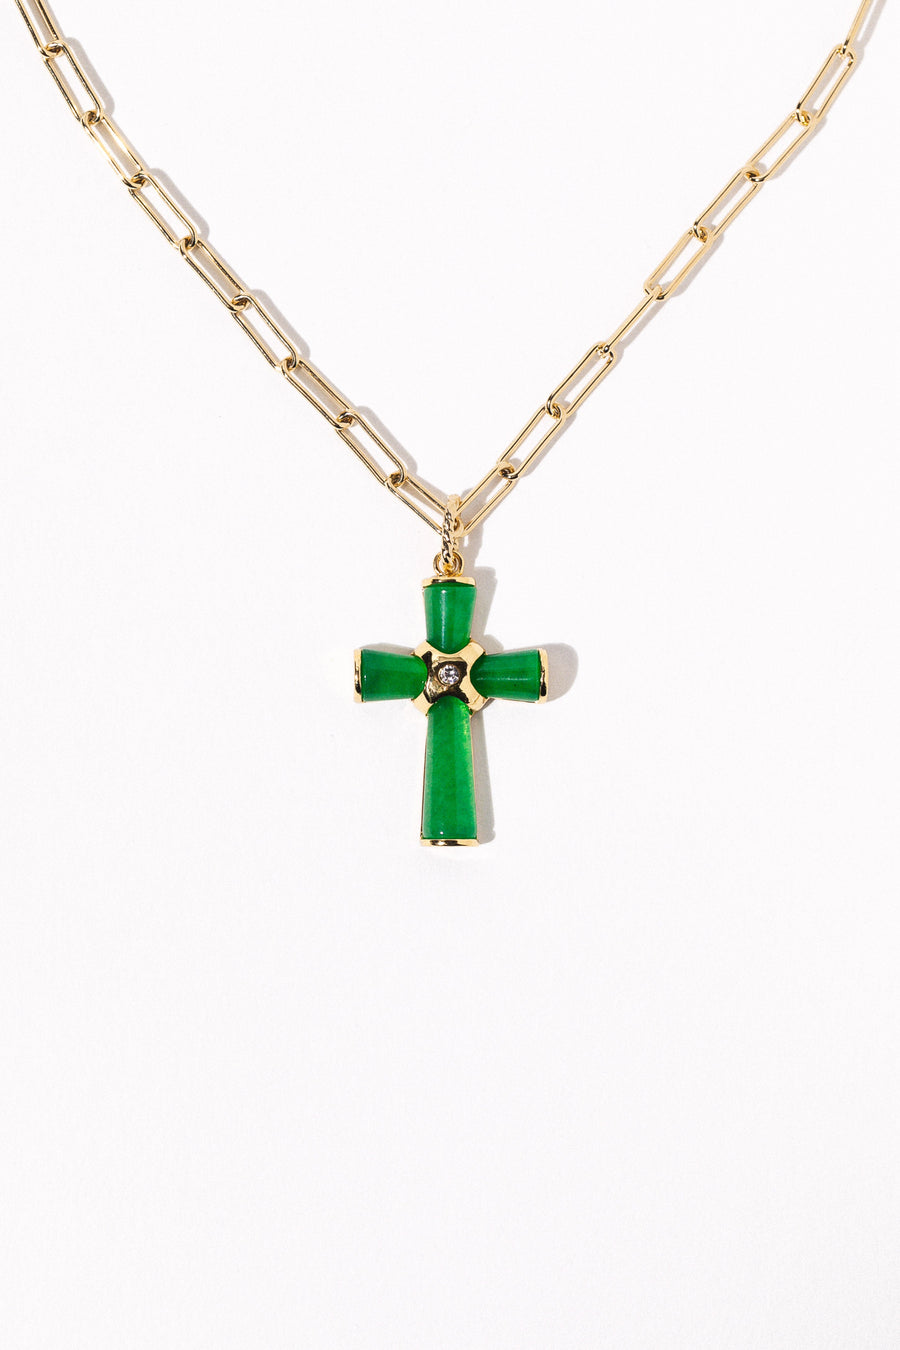 Goddess Jewelry Gold / 16 Inches Vatican Jade Cross Necklace